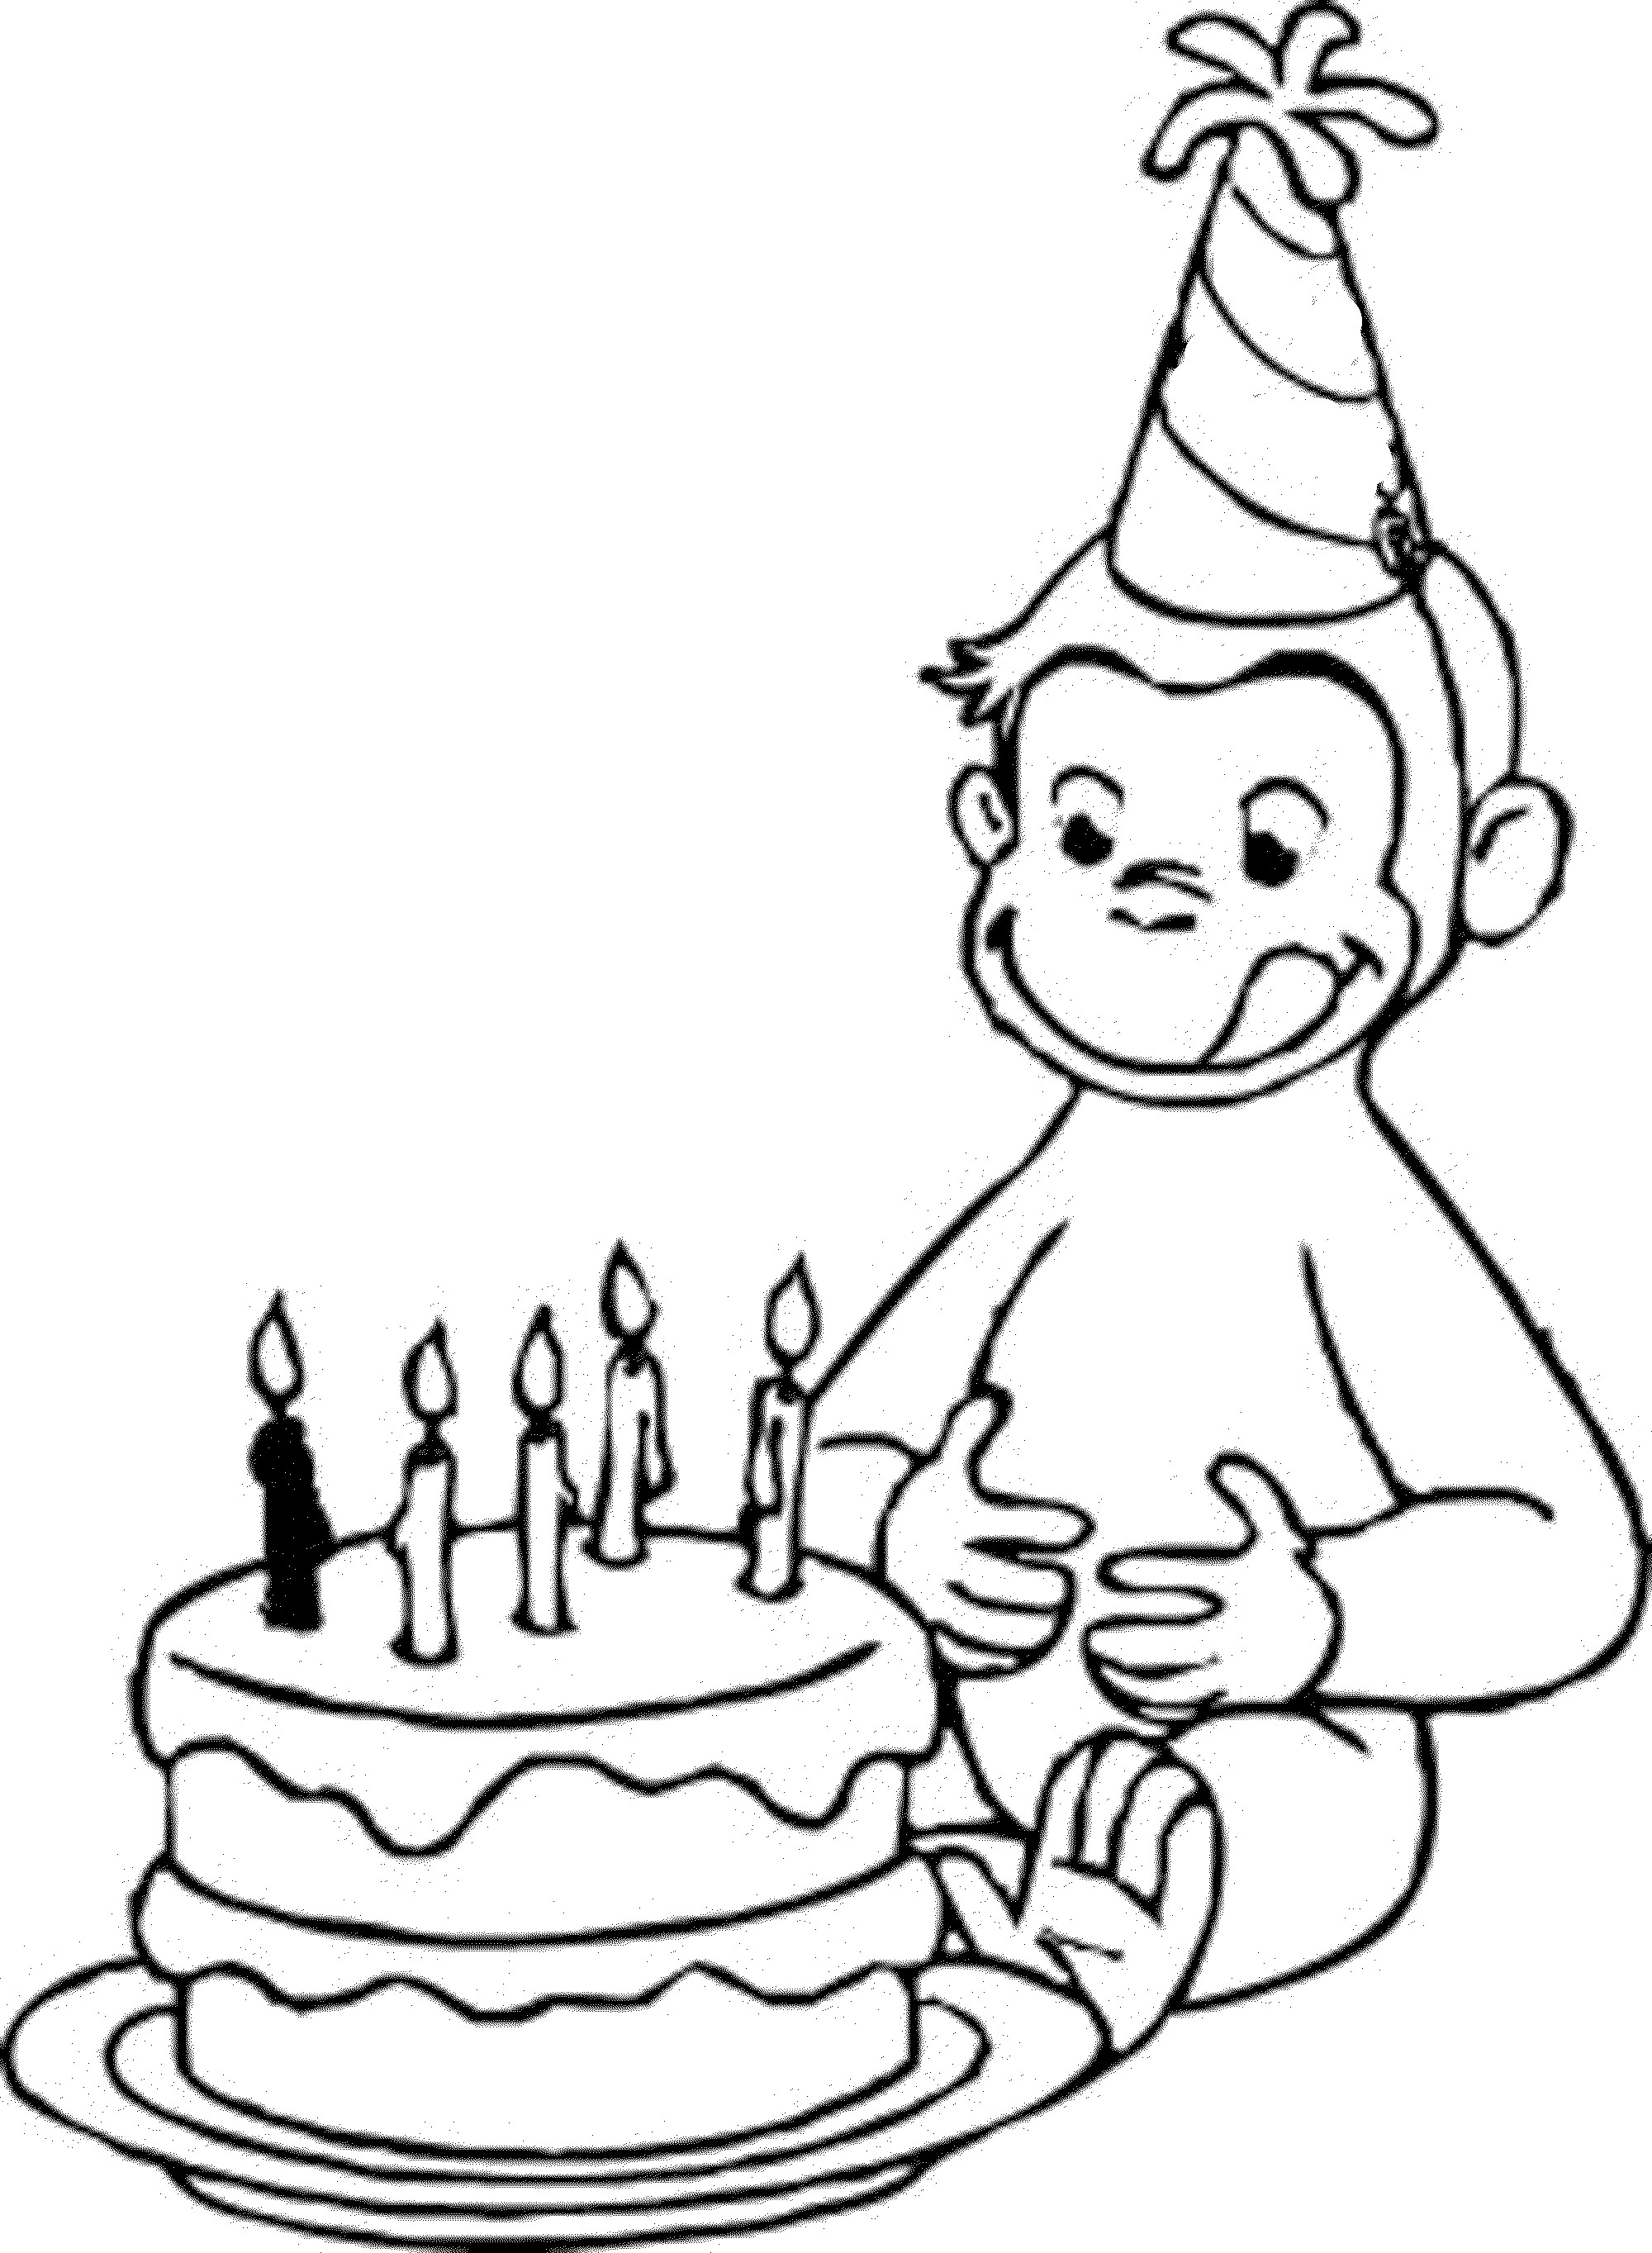 Happy Birthday Drawings For Card | Free download on ClipArtMag